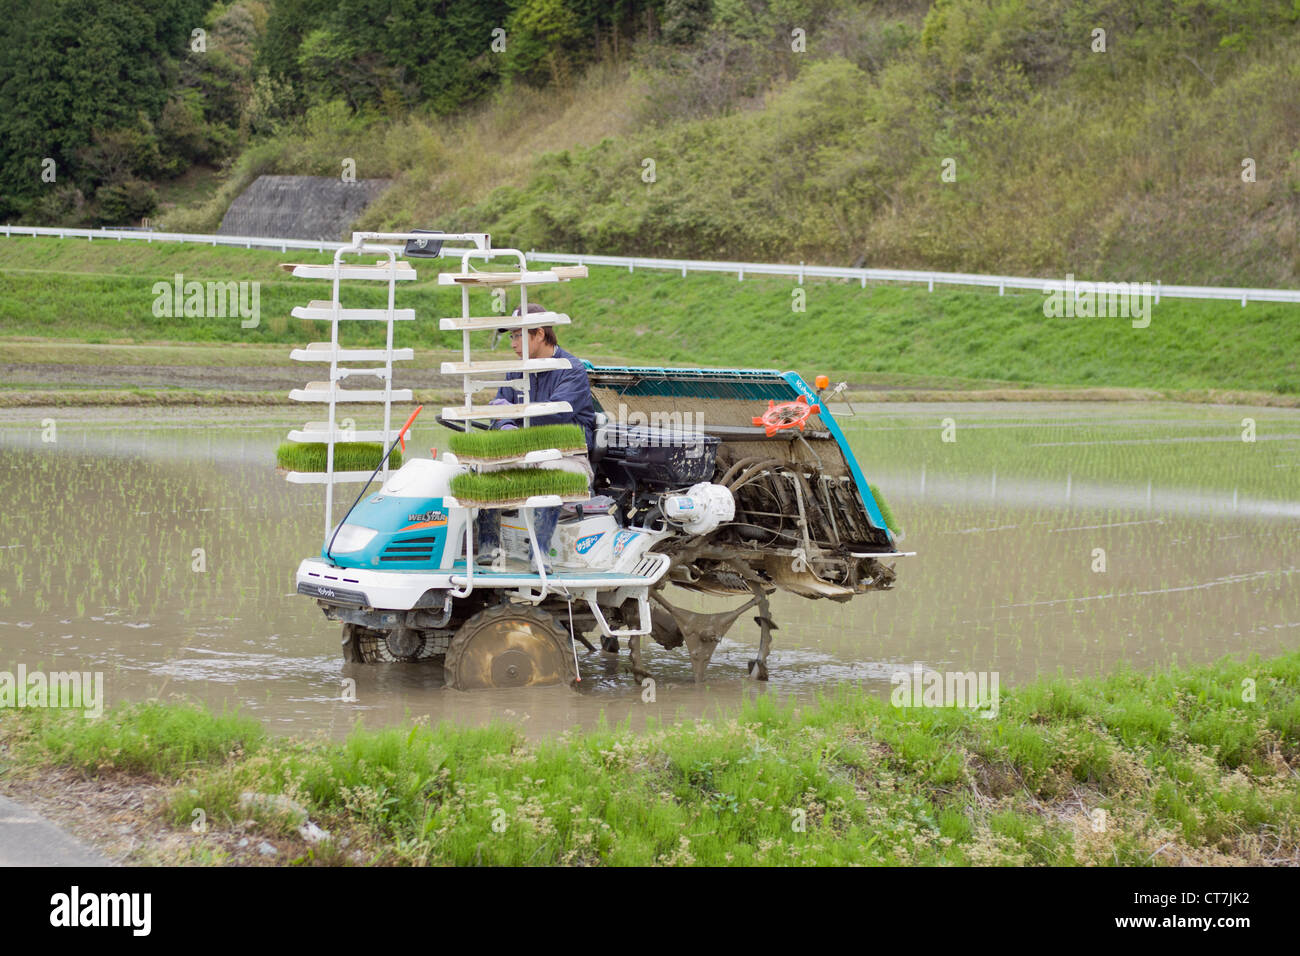 Rice planting machine common in rural Japanese agriculture. Stock Photo